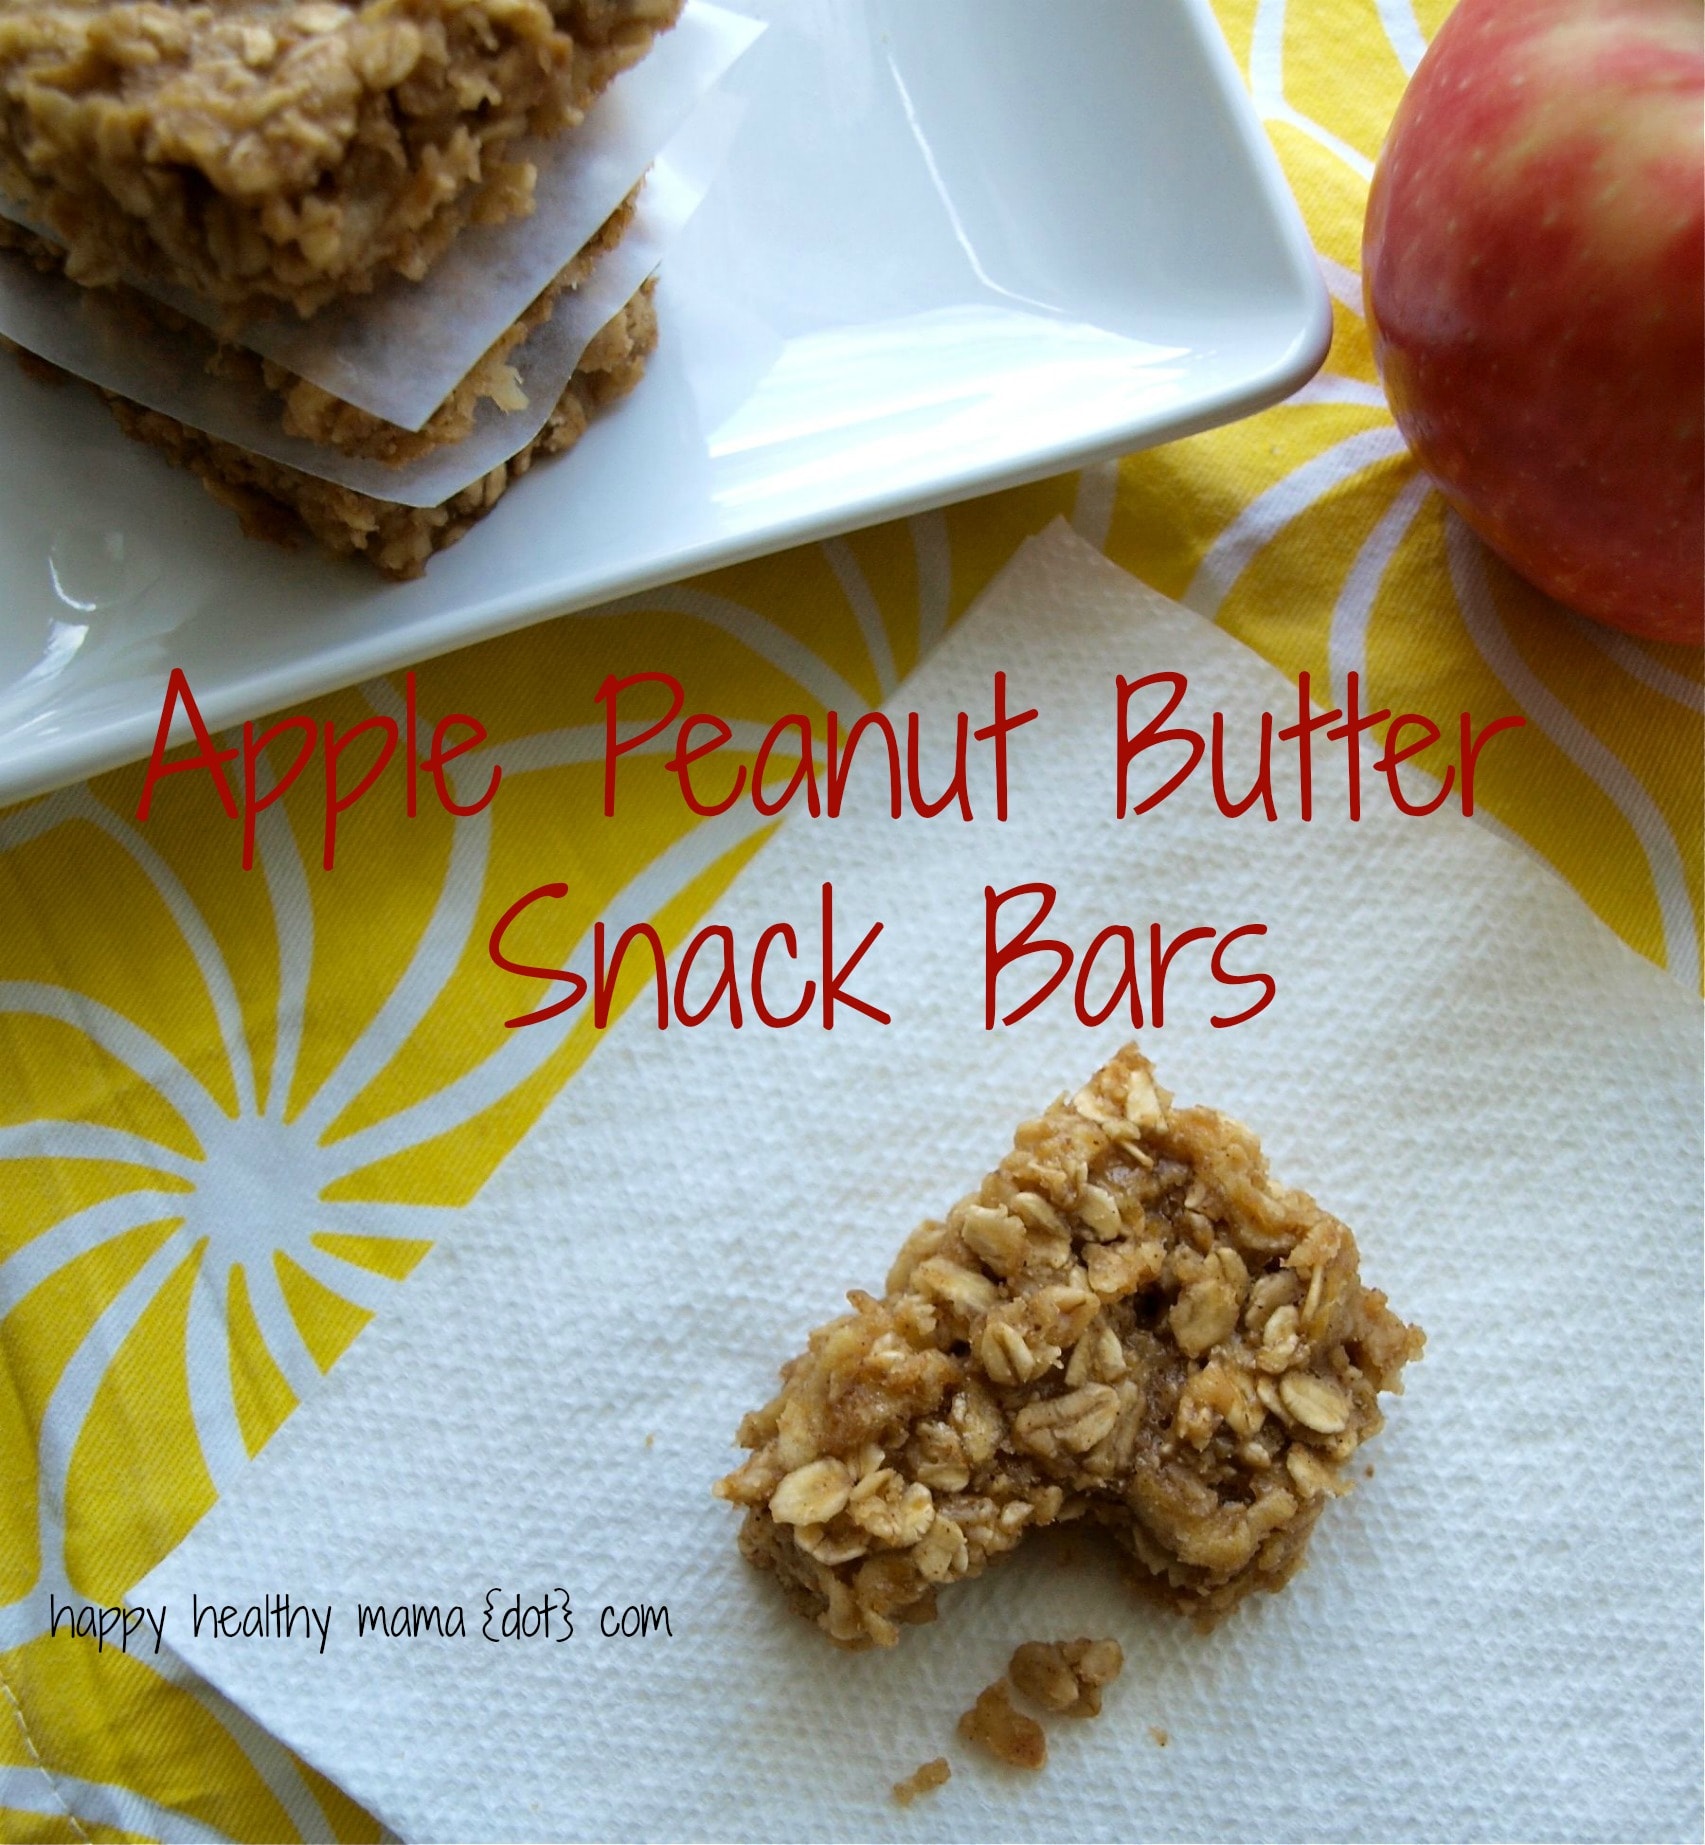 Apple Peanut Butter Snack Bars--no flour, no oil, and no refined sugar. Easy to make and perfect for a school lunch or after school snack.